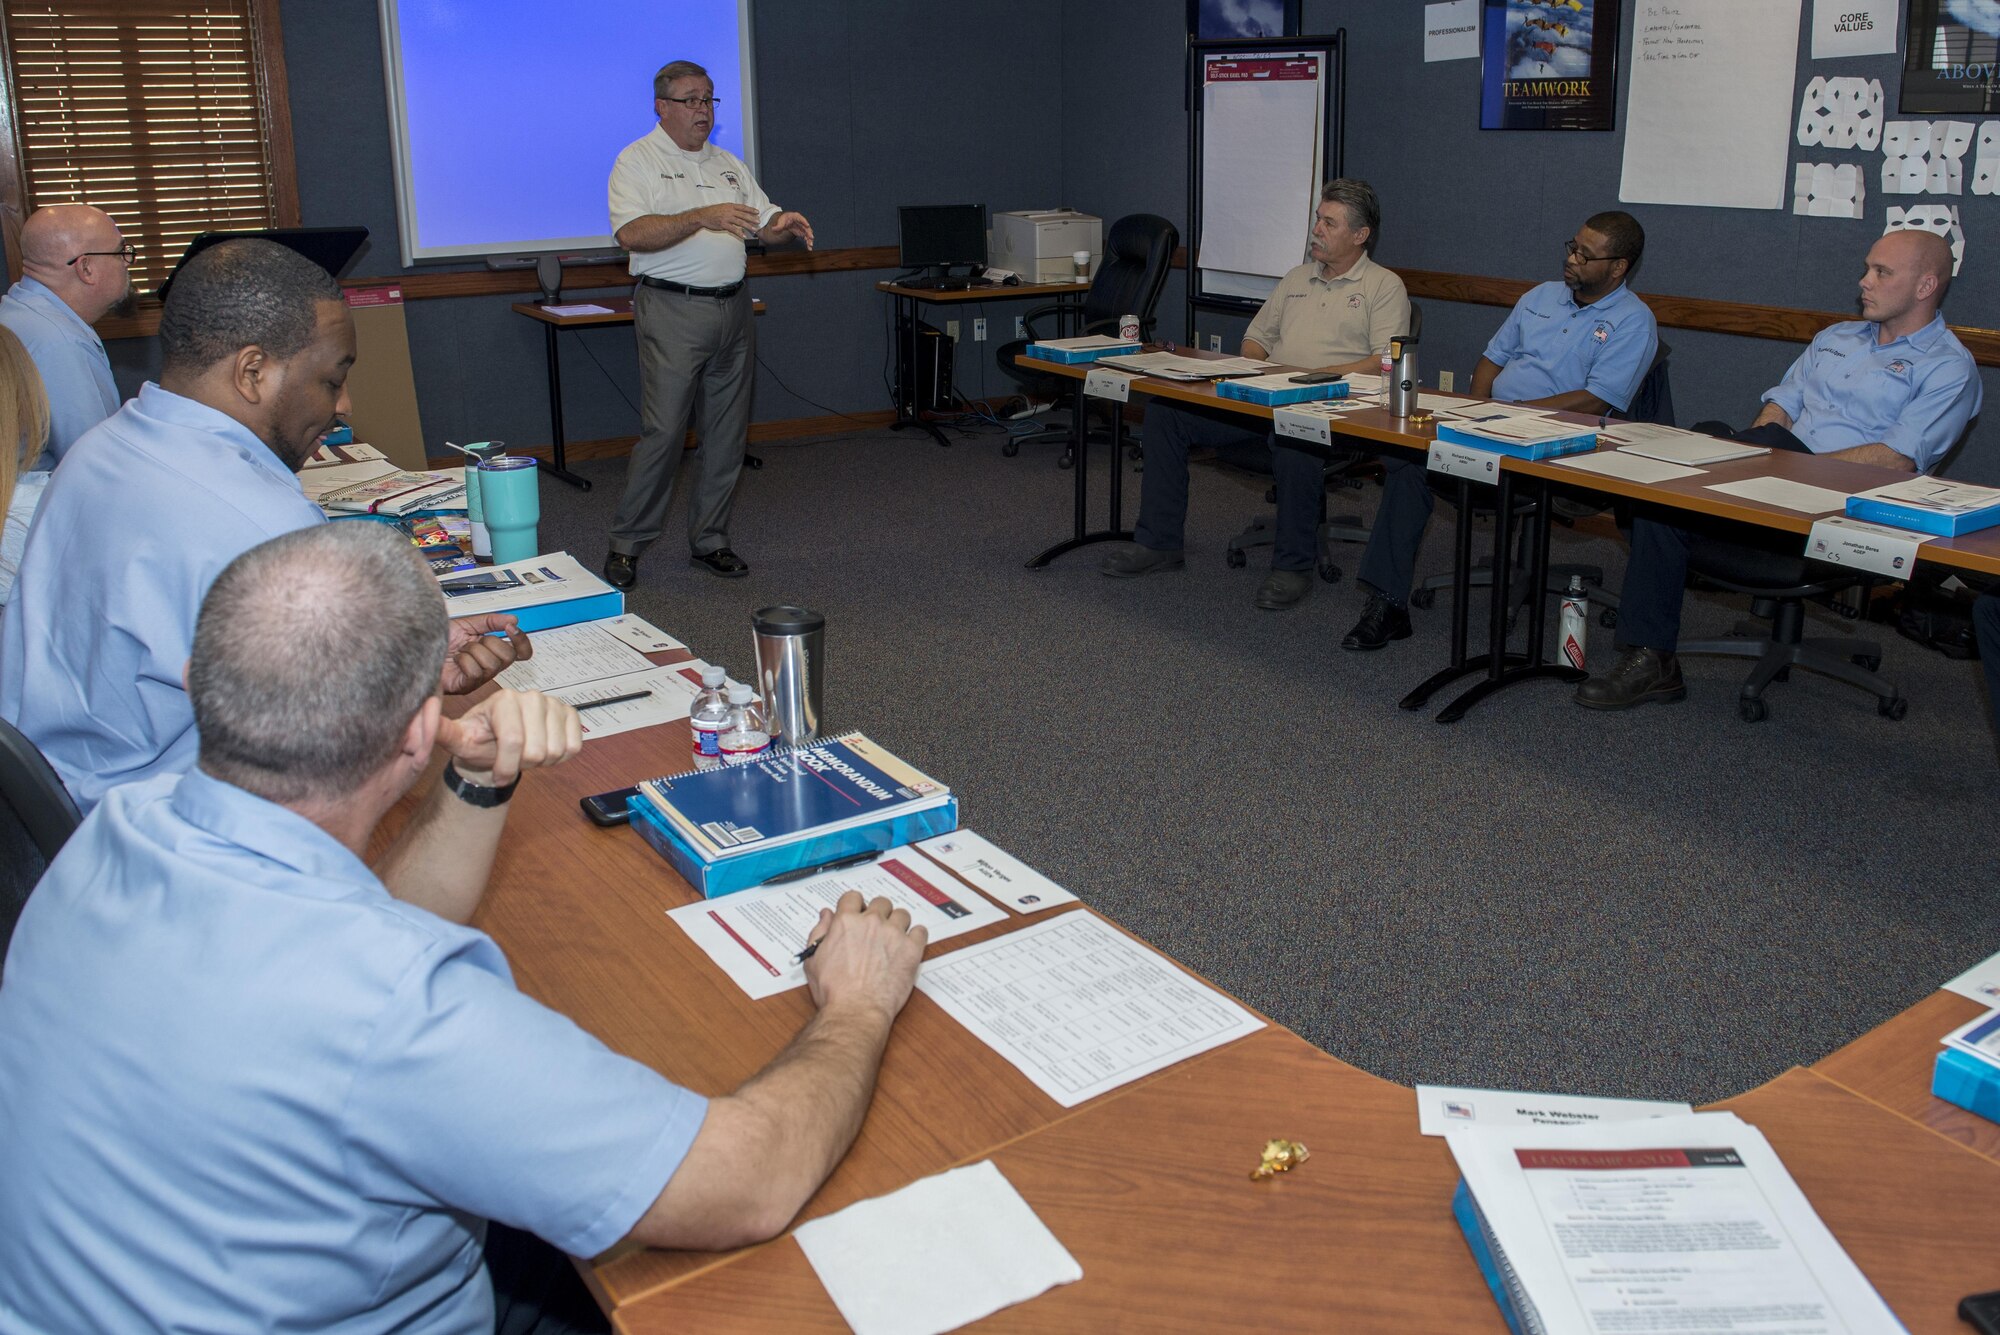 Brian Hall, 12th Maintenance Group operations division chief, discusses leadership principals with members of the 12th MXG Jan. 25, 2017, at Joint Base San Antonio-Randolph. The 12th MXG maintains T-38C Talons, T-1 Jayhawks and T-6 Texans for the 12th Flying Training Wing. (U.S. Air Force photo by Senior Airman Stormy Archer)